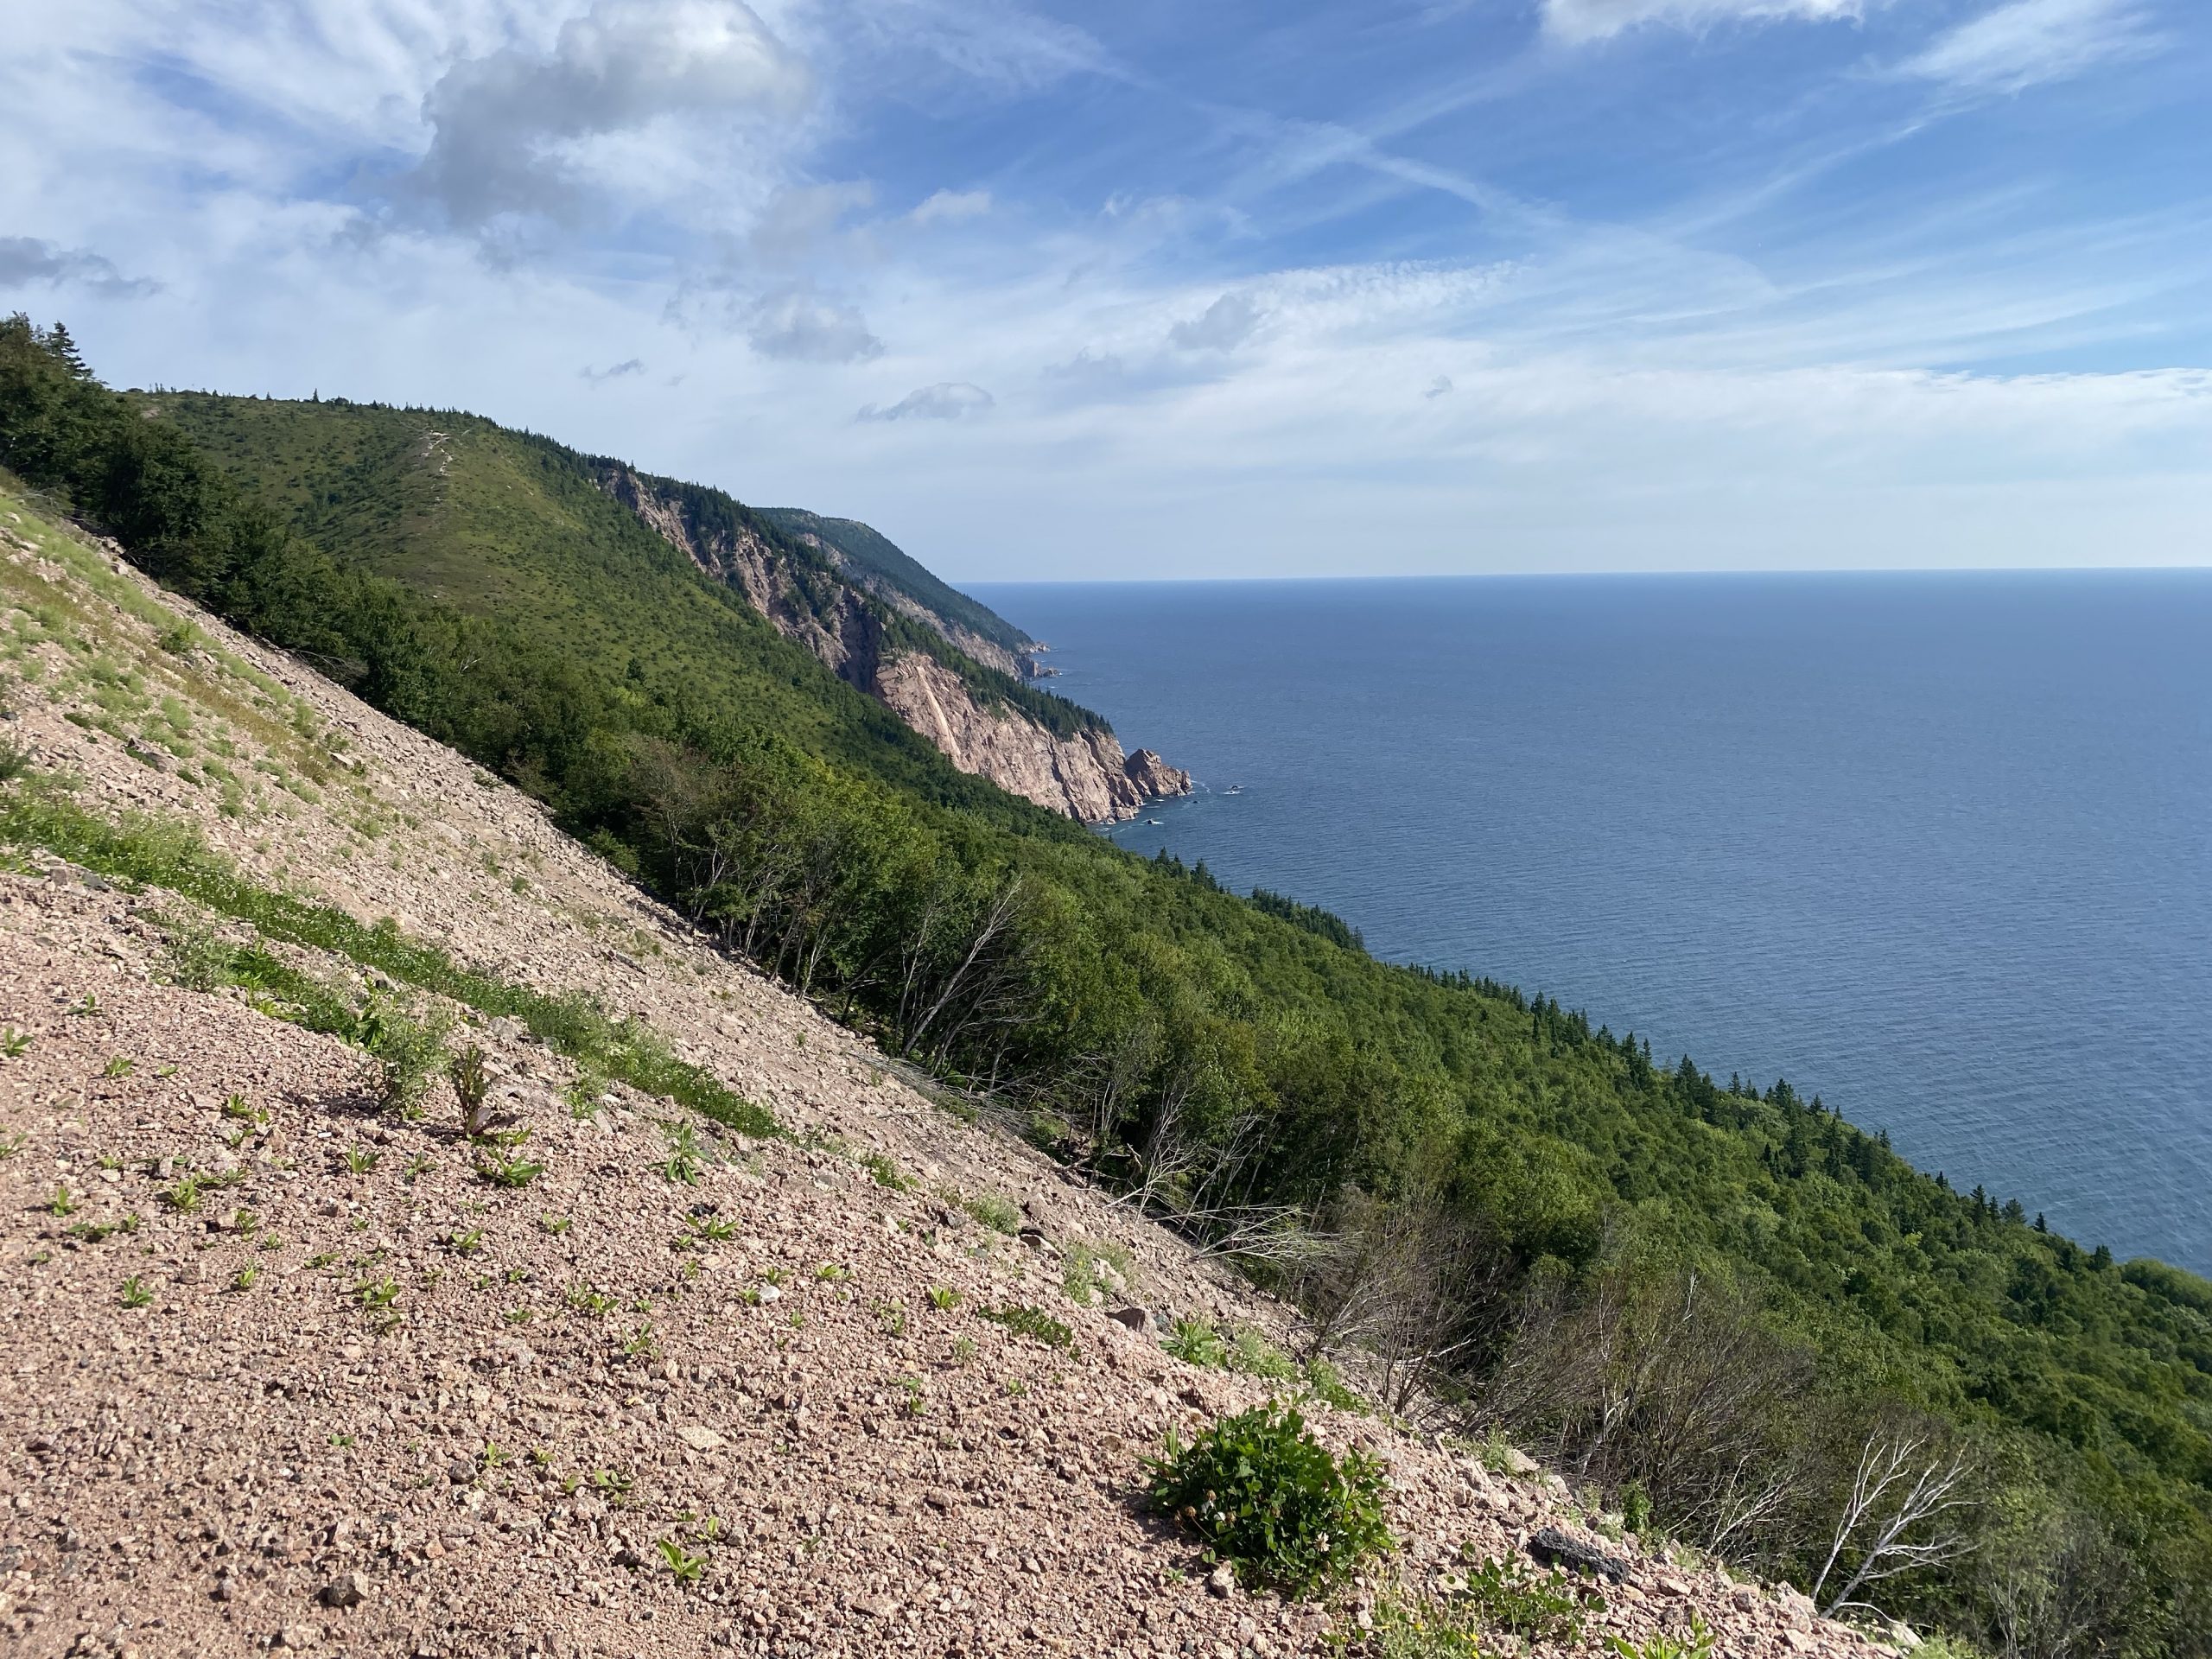 The shoreline north of an overlook along the Cabot Trail in Nova Scotia.